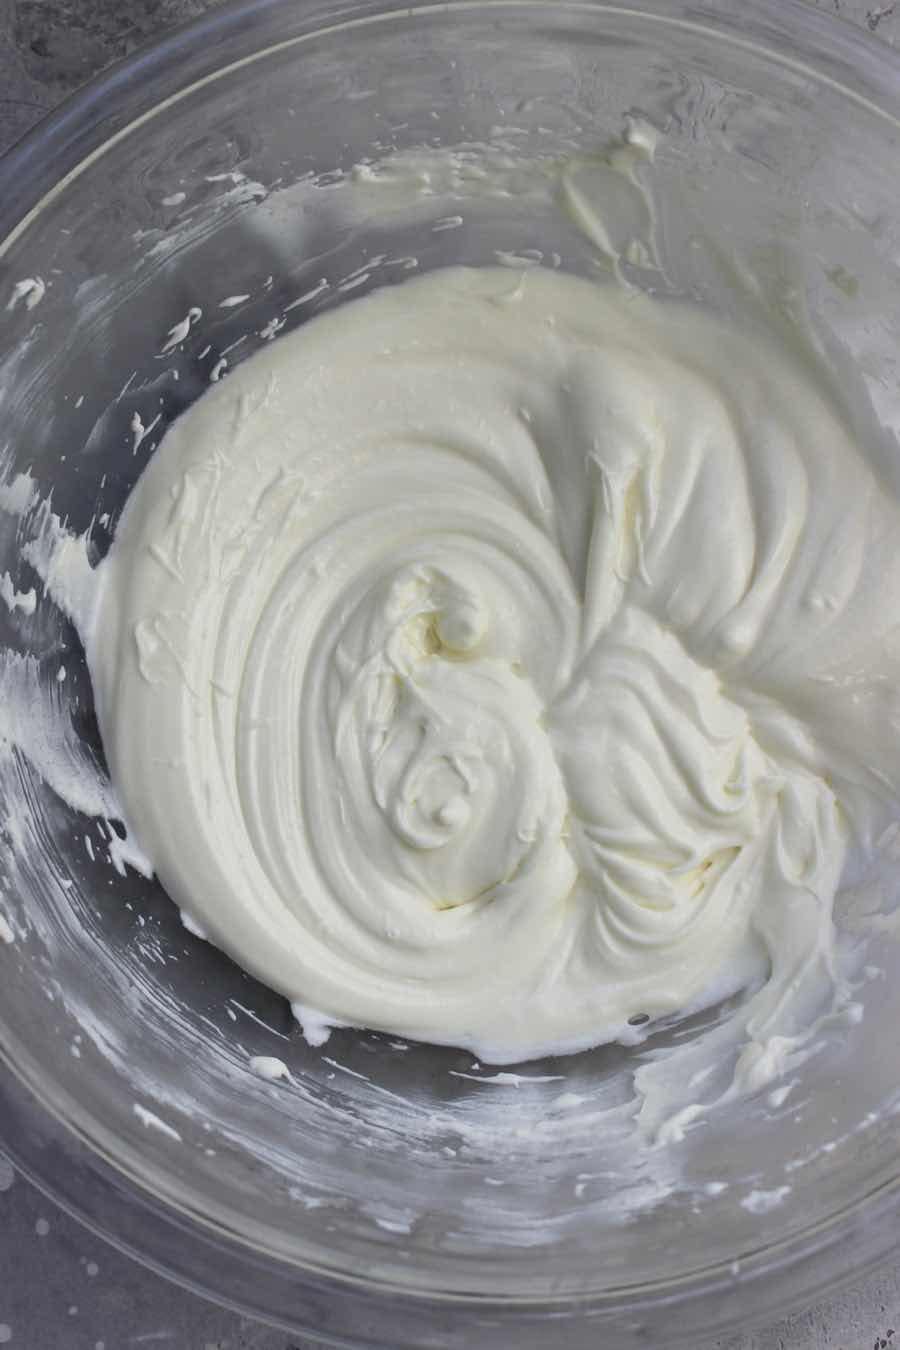 beat cream cheese and sugar until fluffy